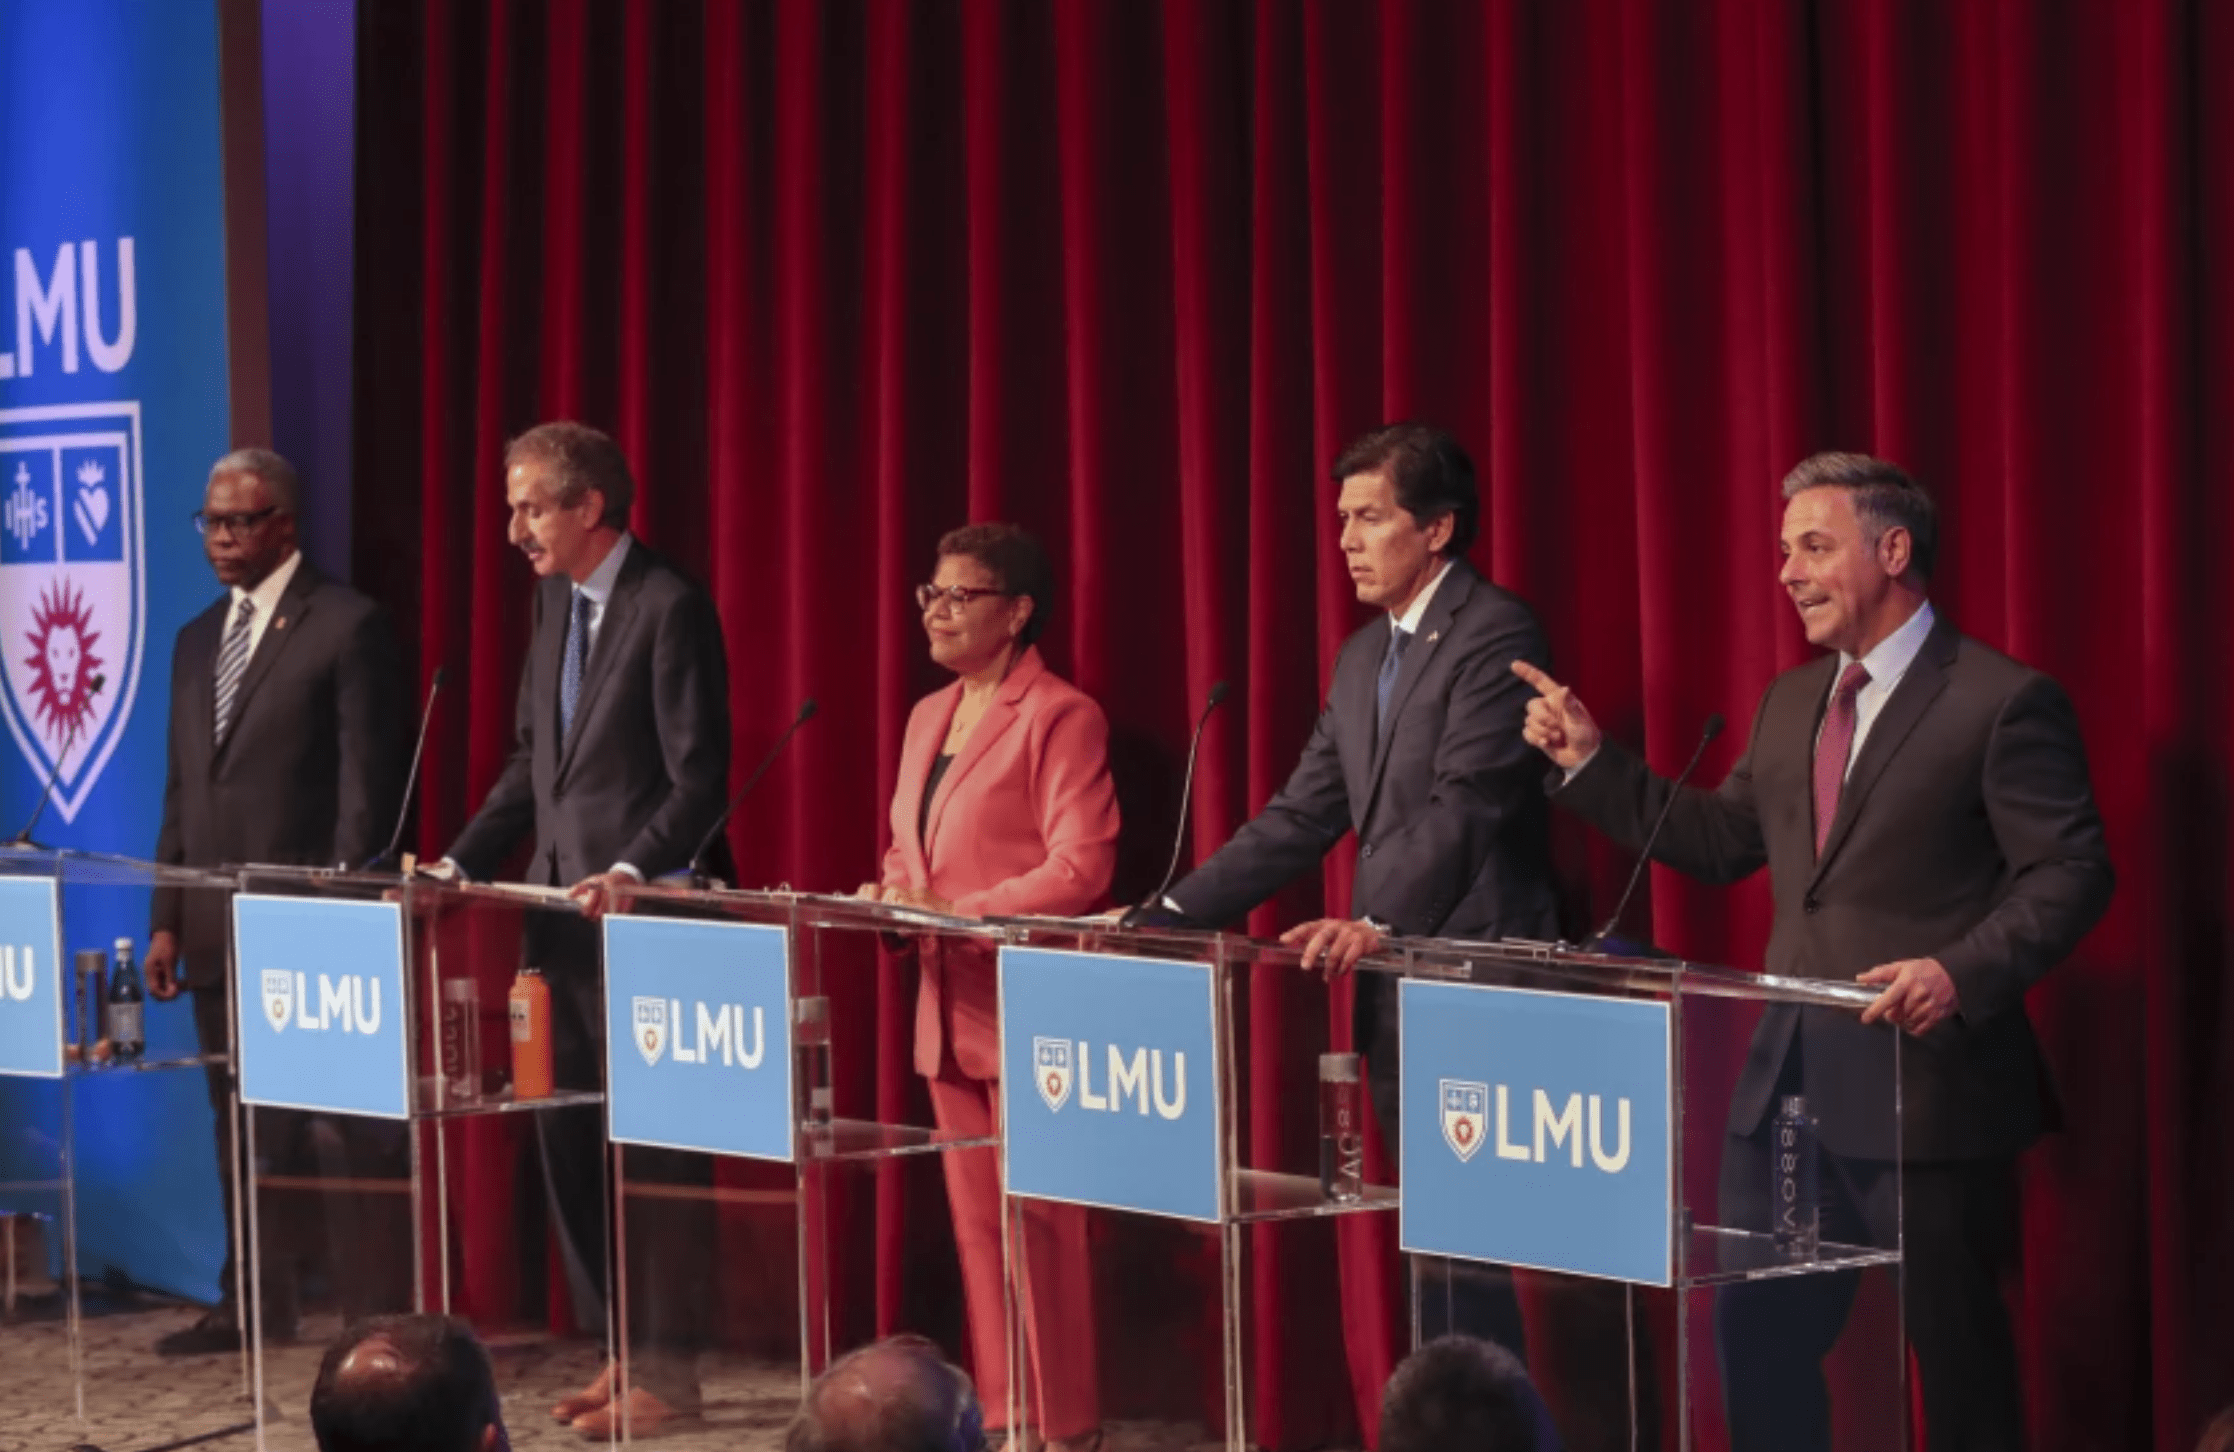 Los Angeles mayoral candidates, from left, former Metro board member Mel Wilson, L.A. City Atty. Mike Feuer, Rep. Karen Bass and L.A. City Councilmembers Kevin de León and Joe Buscaino participate in last month’s debate at Loyola Marymount University.(Allen J. Schaben / Los Angeles Times)